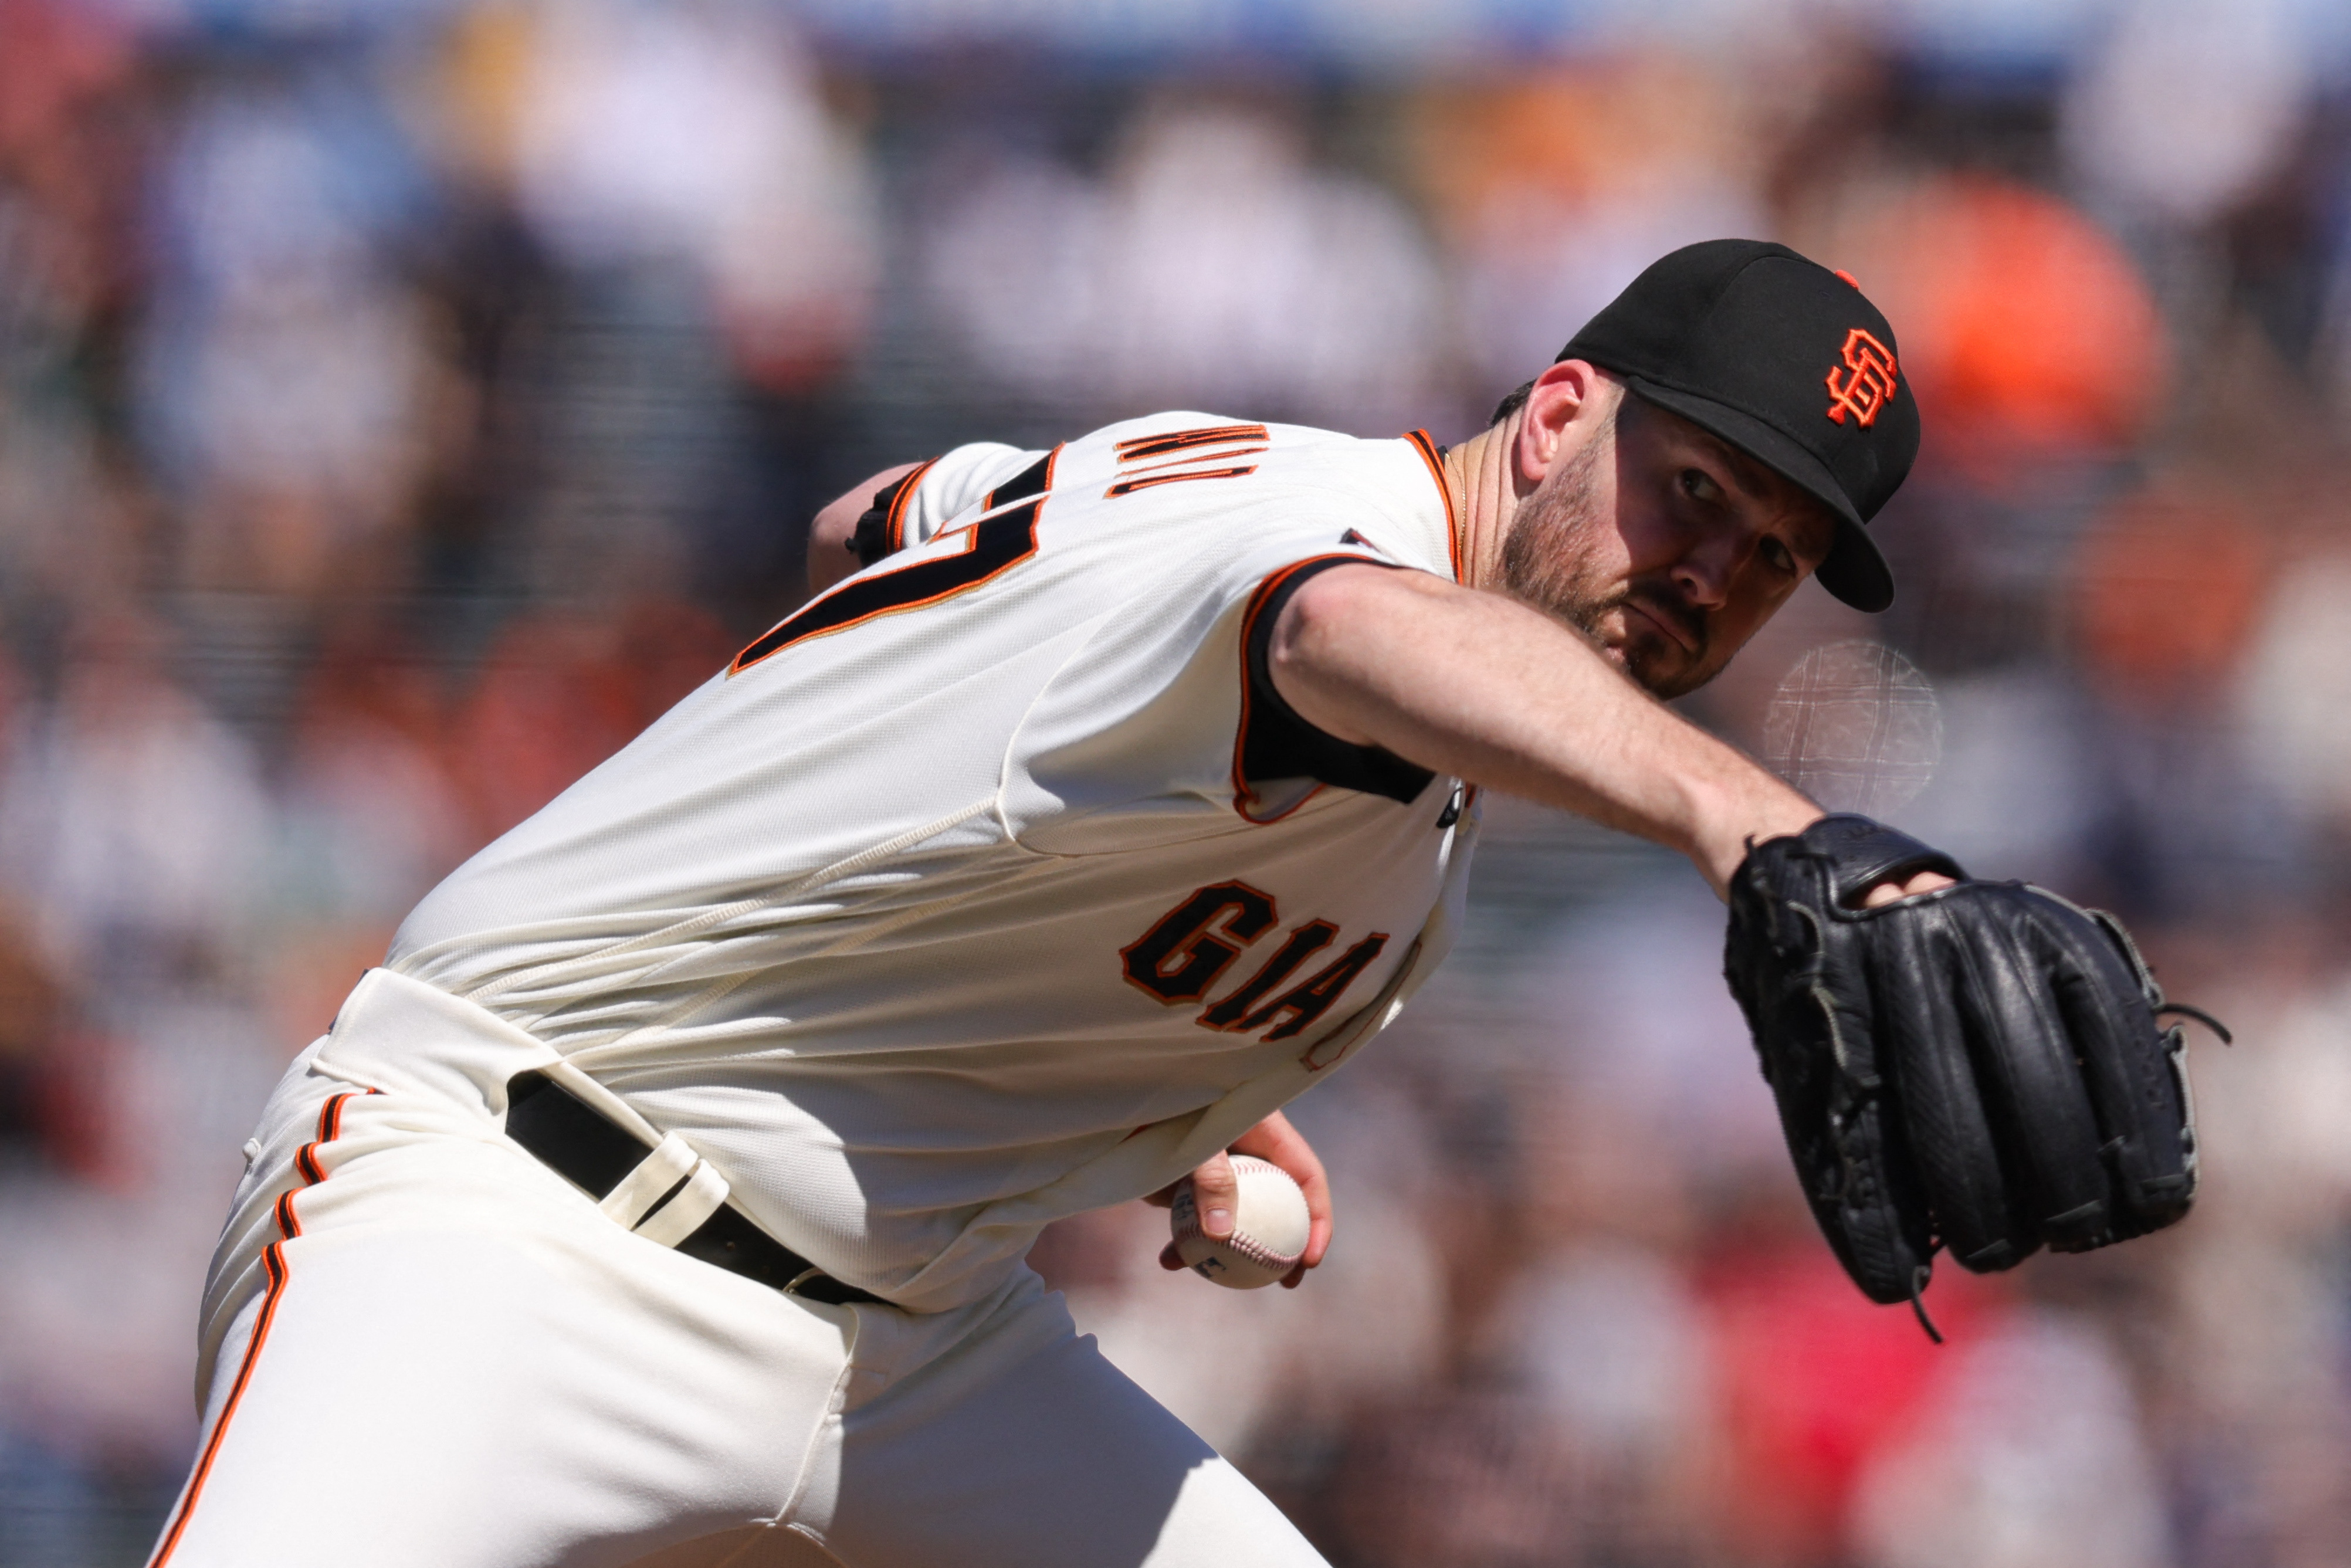 Giants rally late, edge Guardians in 10th